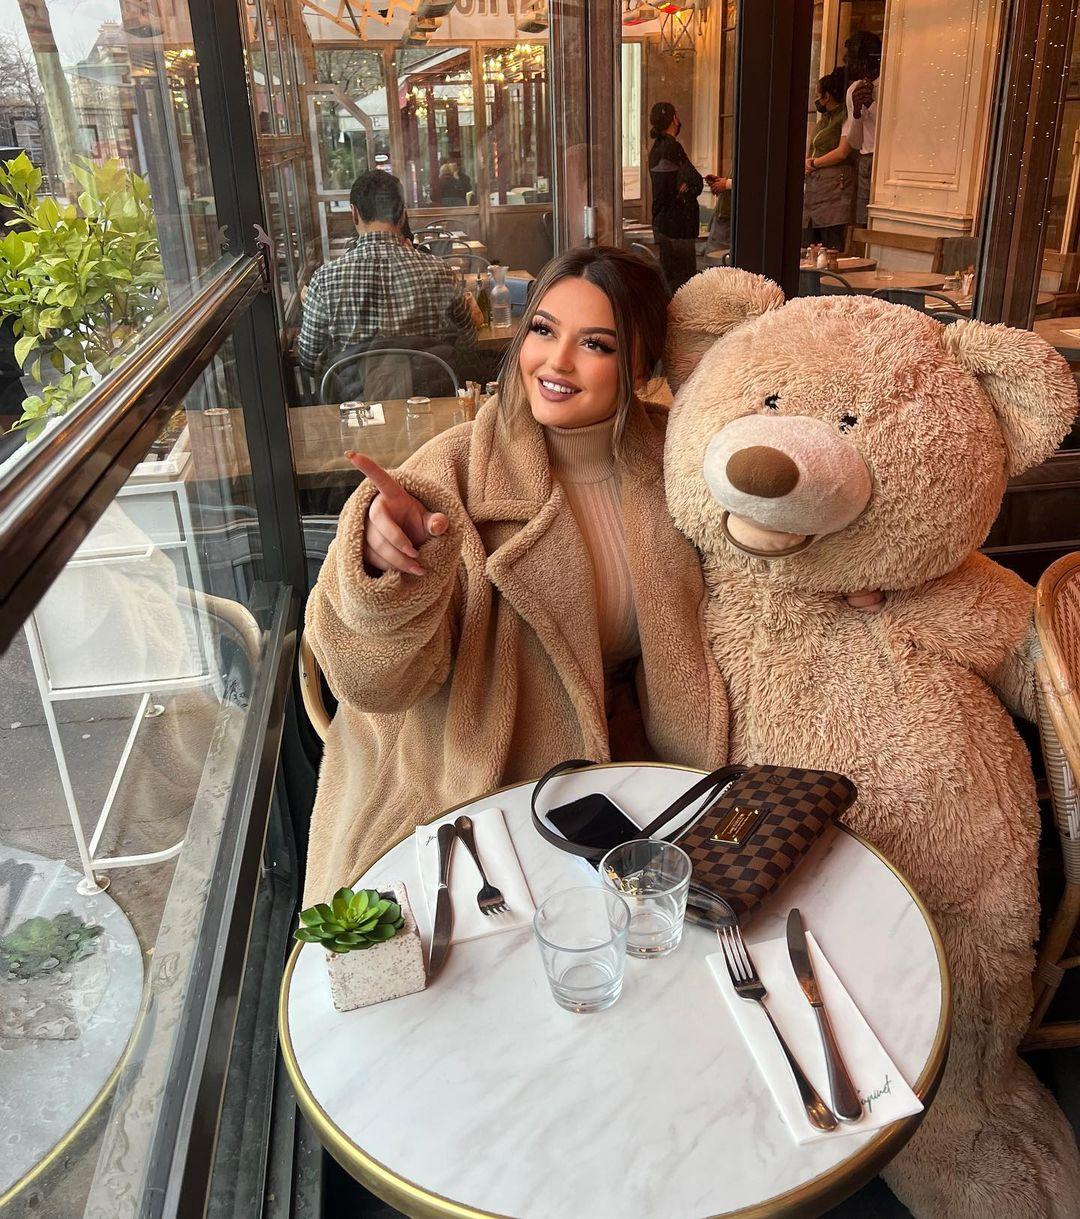 Which is your favorite teddy bear ? 😜🧸🧸